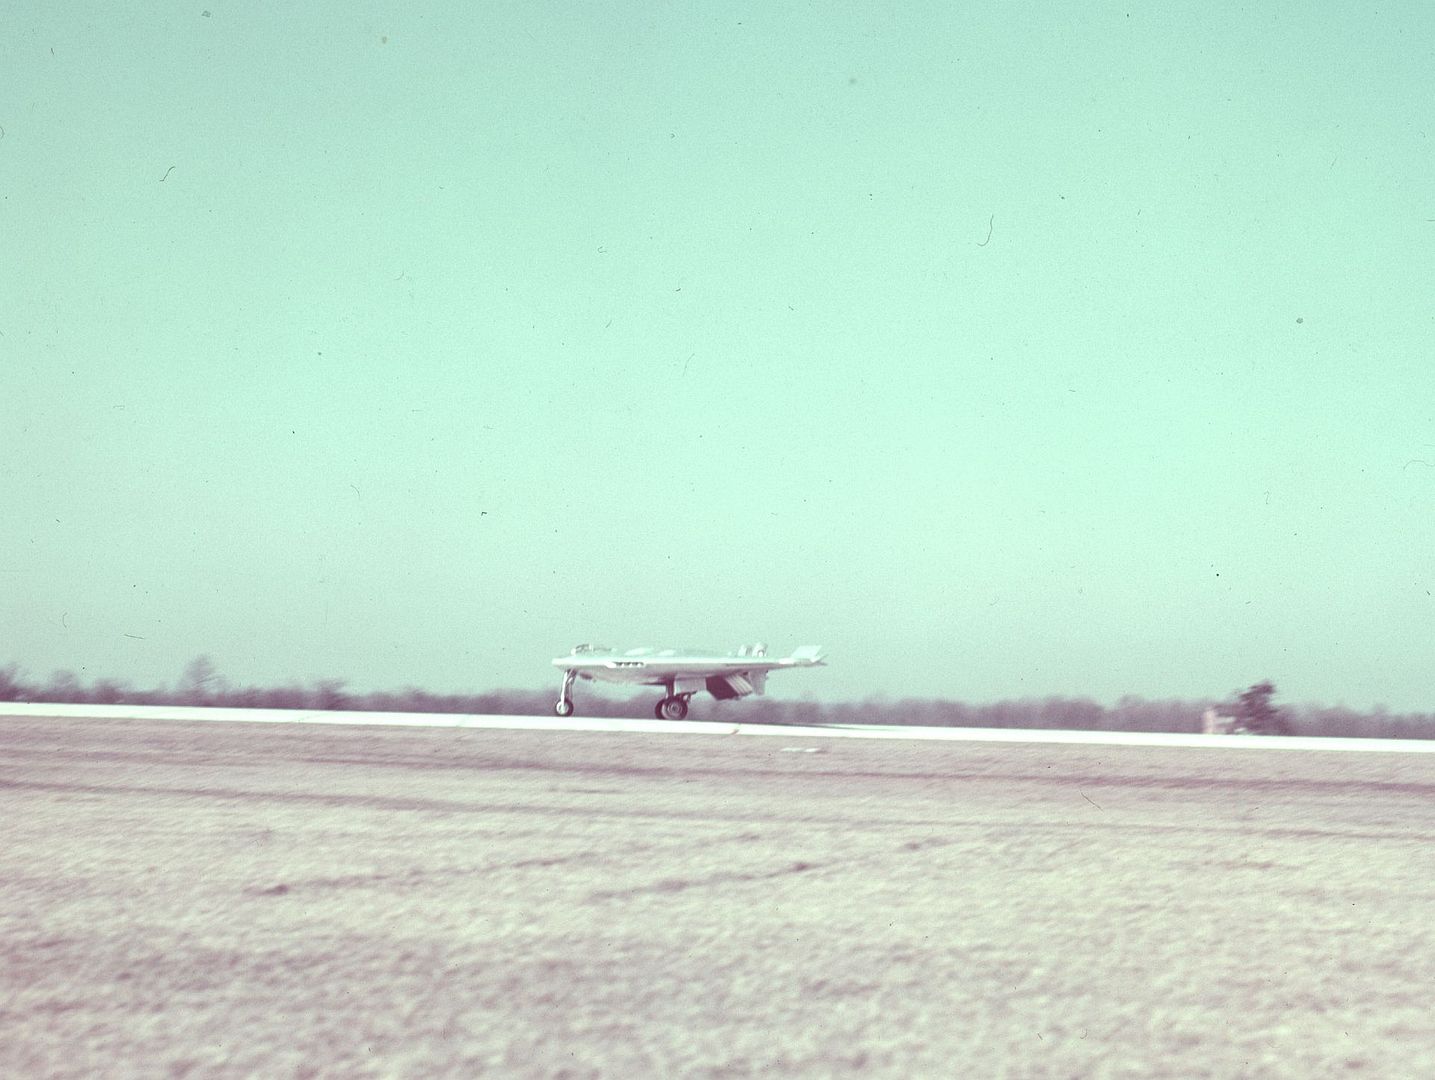 49 Coming In For A Landing At An Airfield